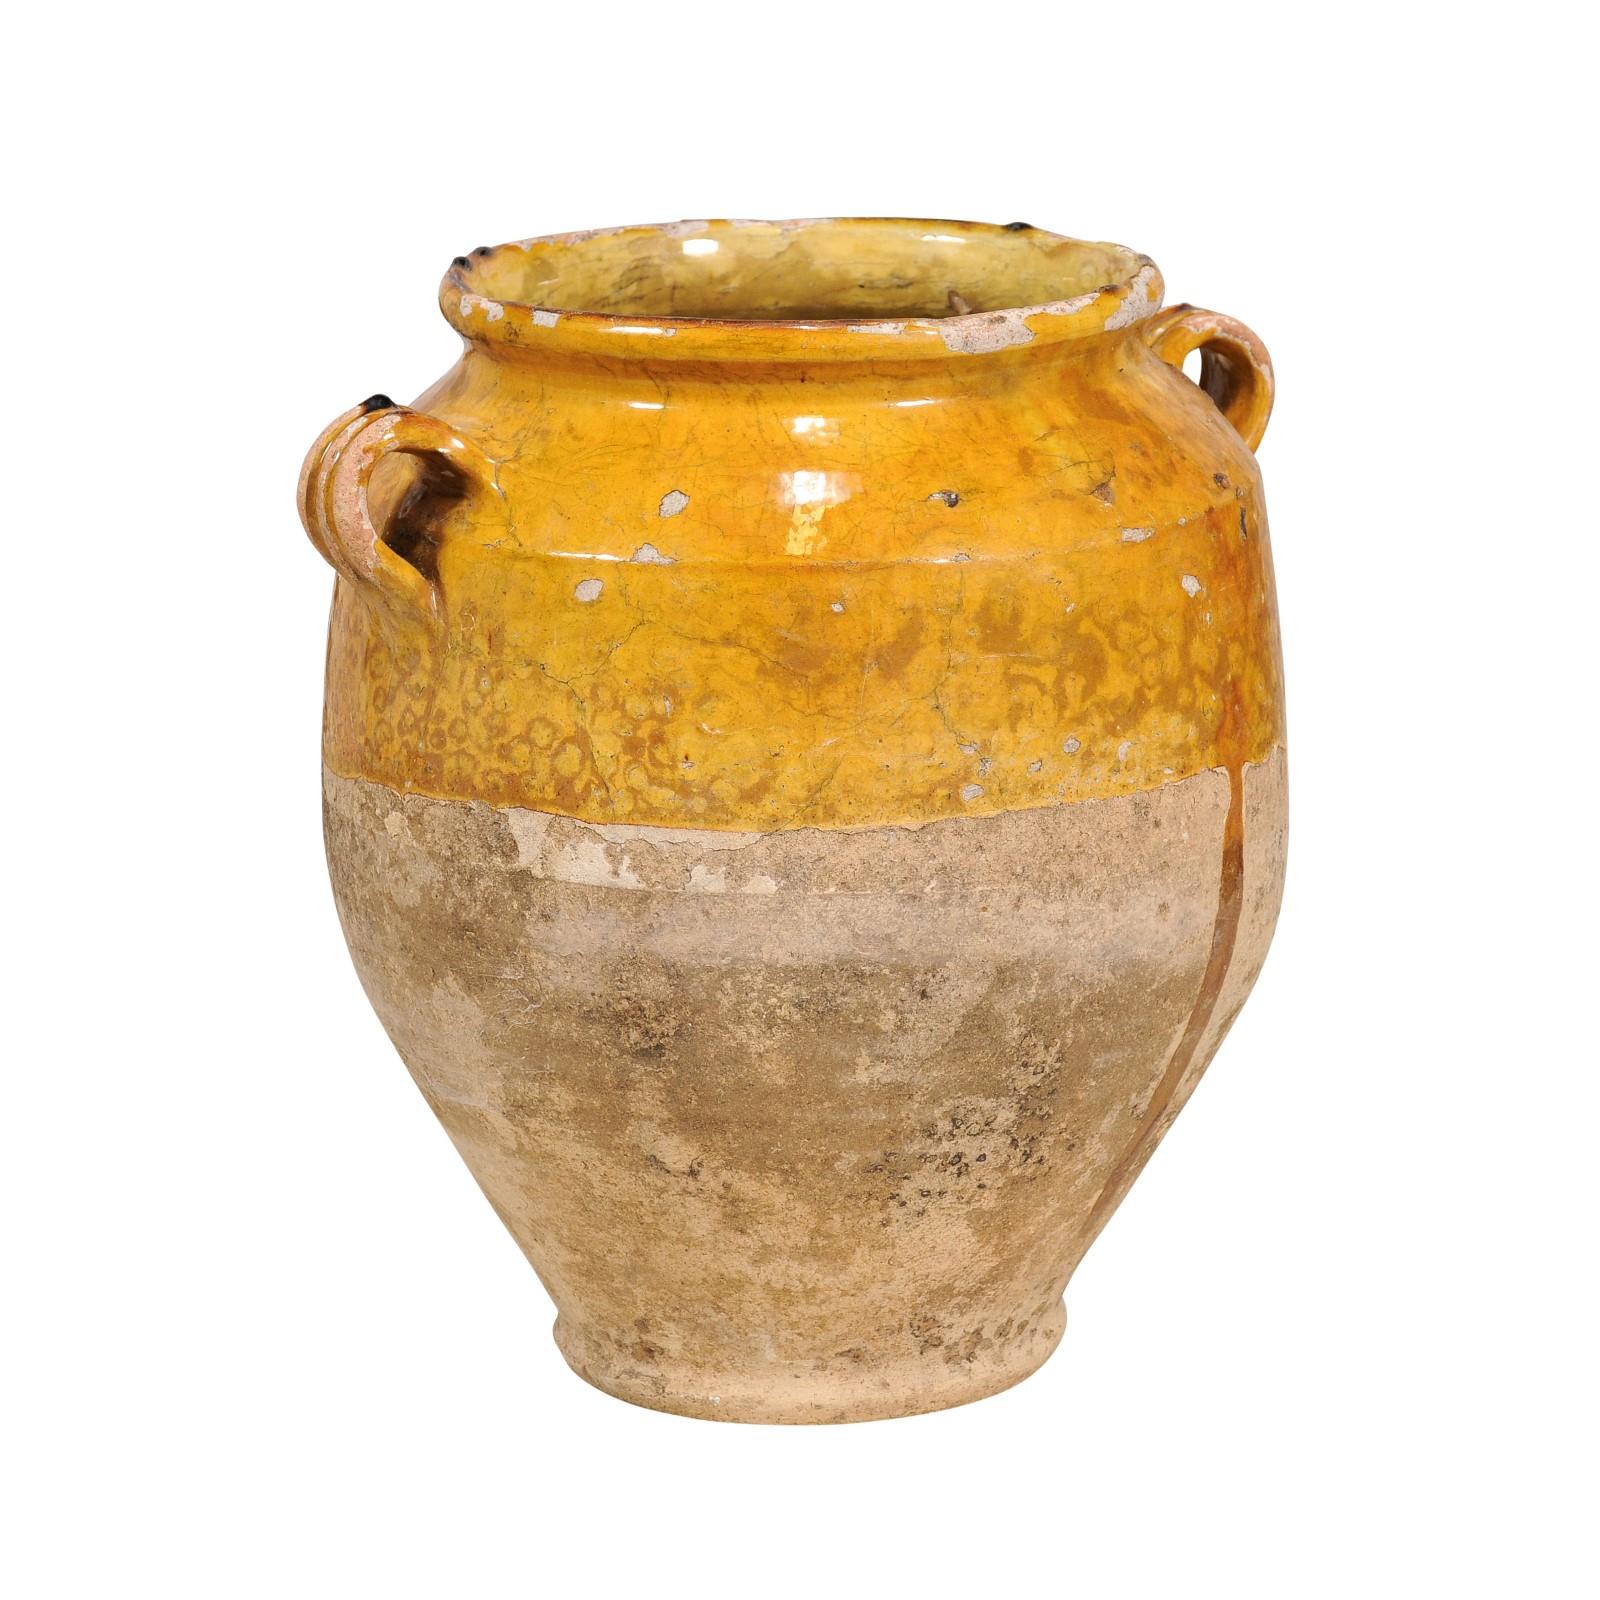 A French Provincial pot à confit pottery from the 19th century with yellow glaze, two lateral handles and rustic patina. This 19th-century French Provincial pot à confit is a delightful relic of rustic culinary history. The pot, traditionally used